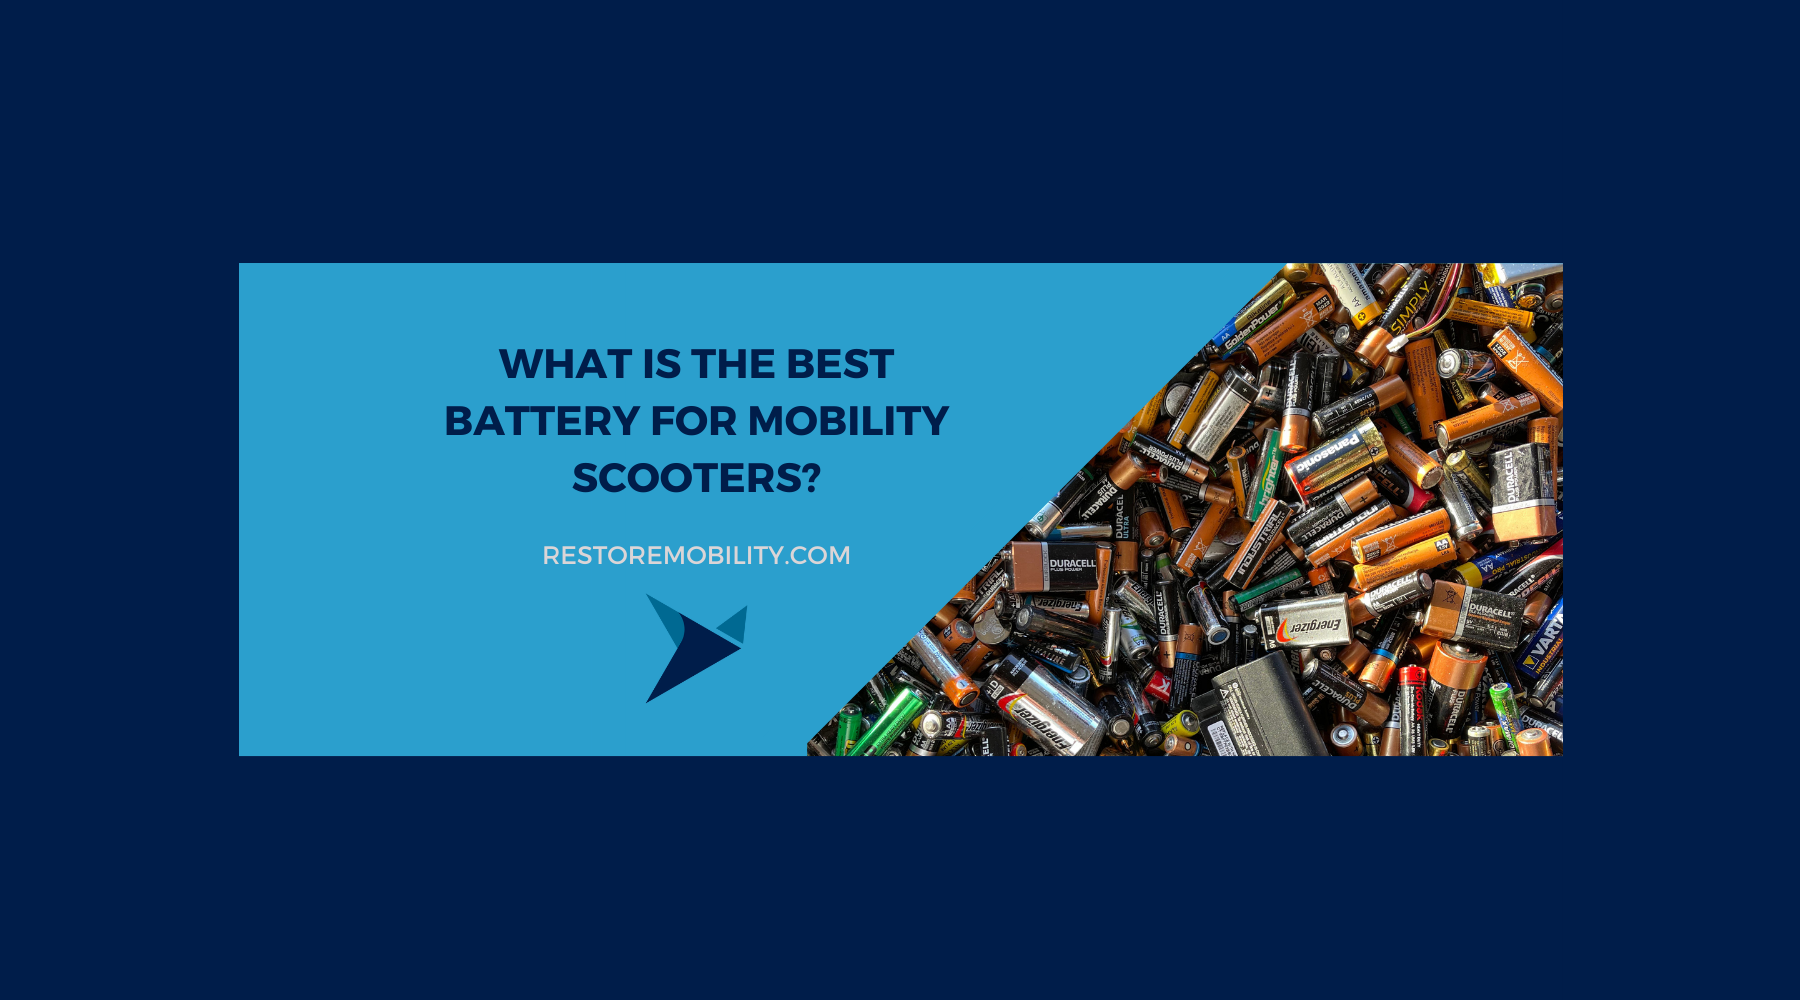 What is the Best Battery for Mobility Scooters?